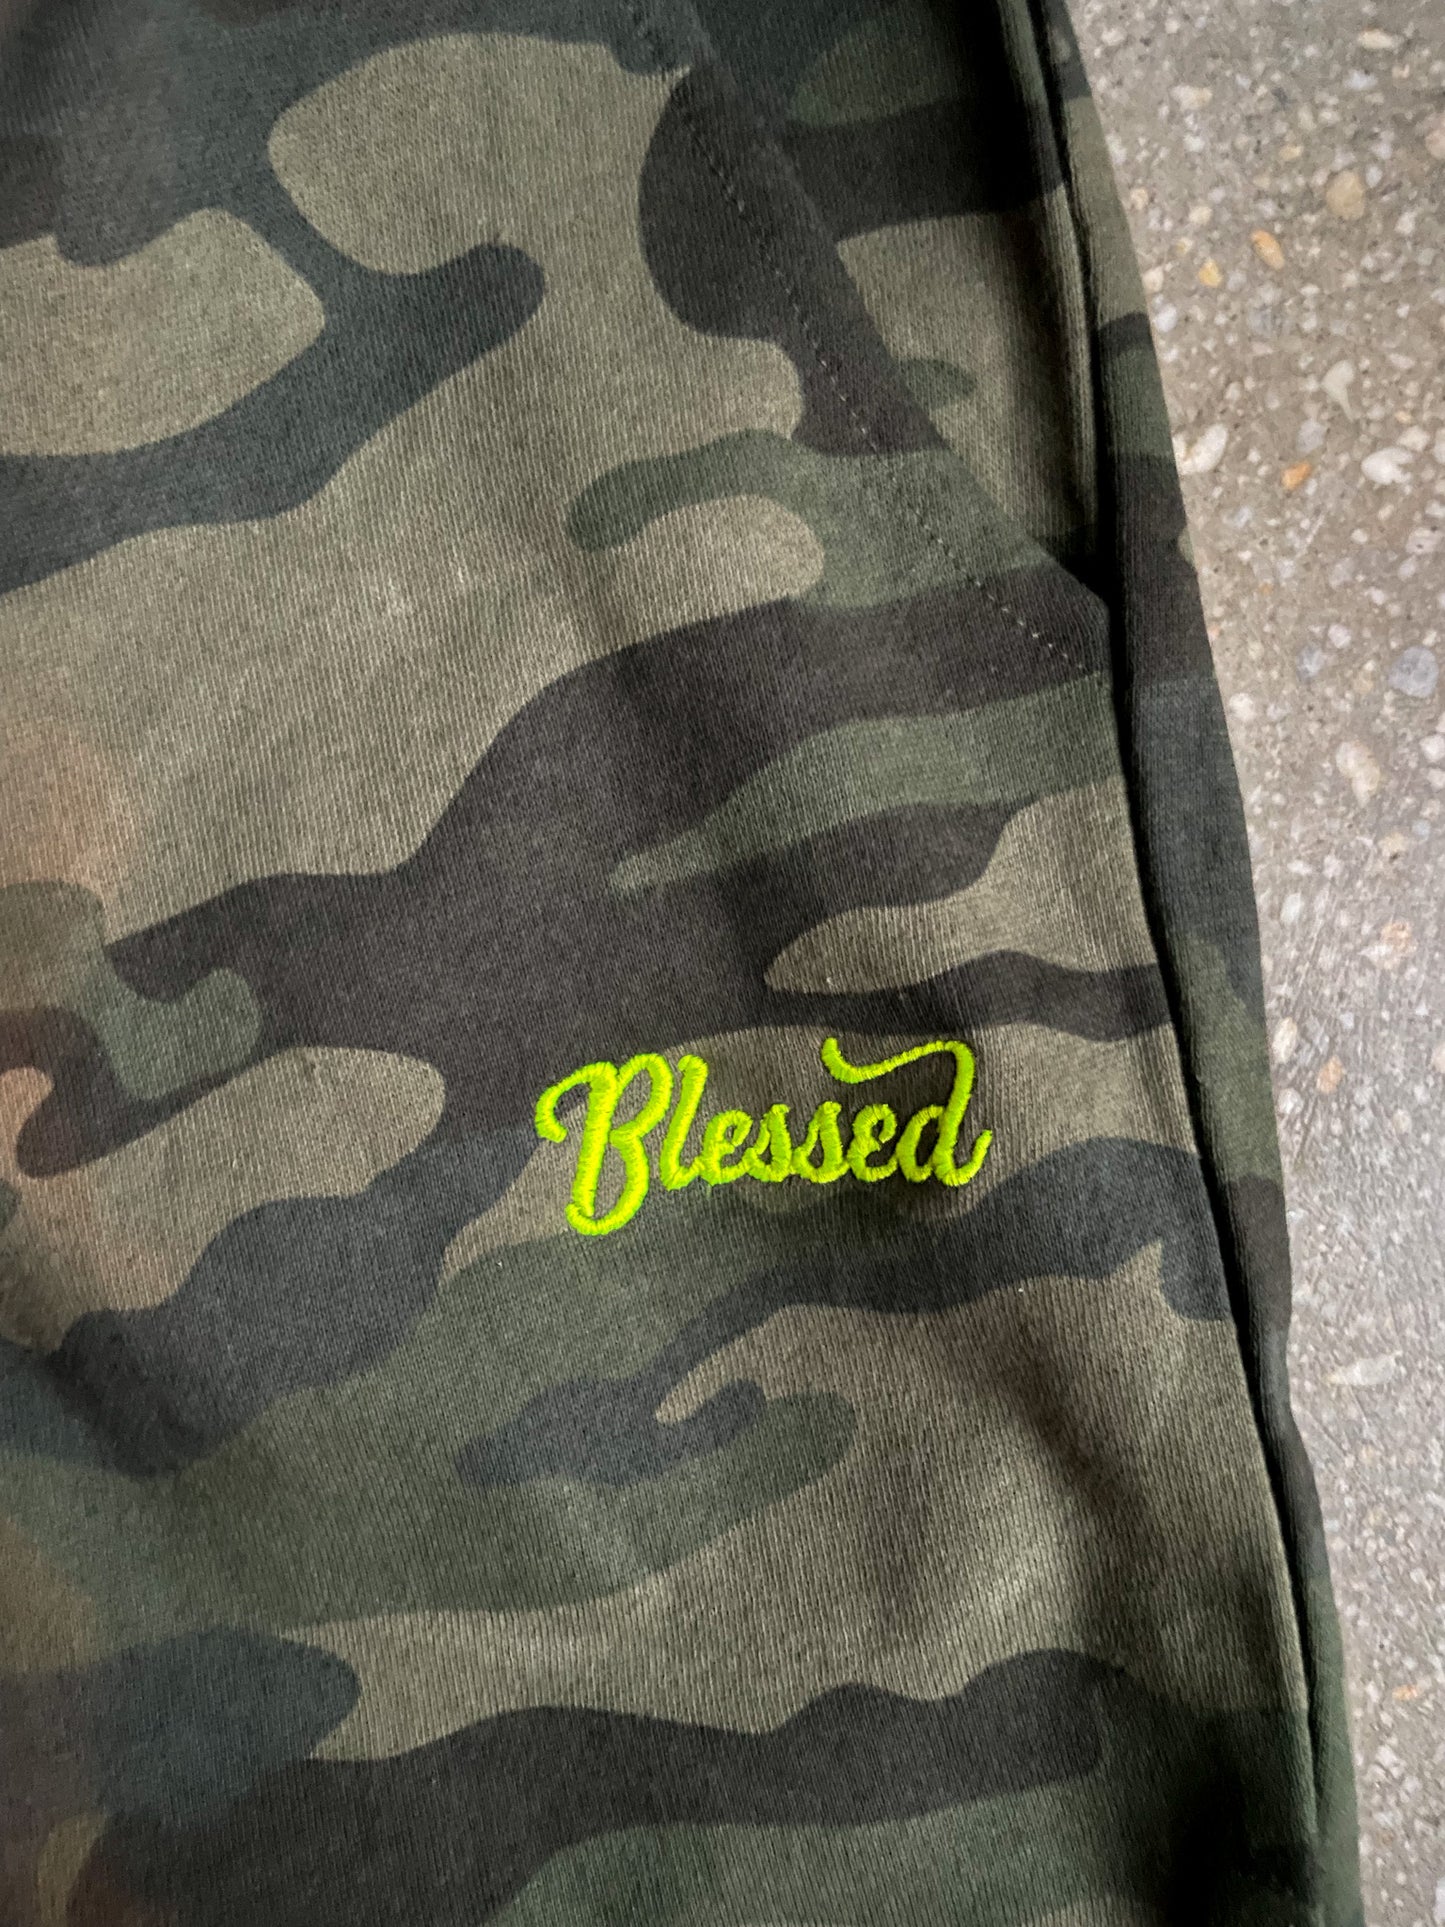 Blessed Embroidered Adult/Unisex Sweatpants